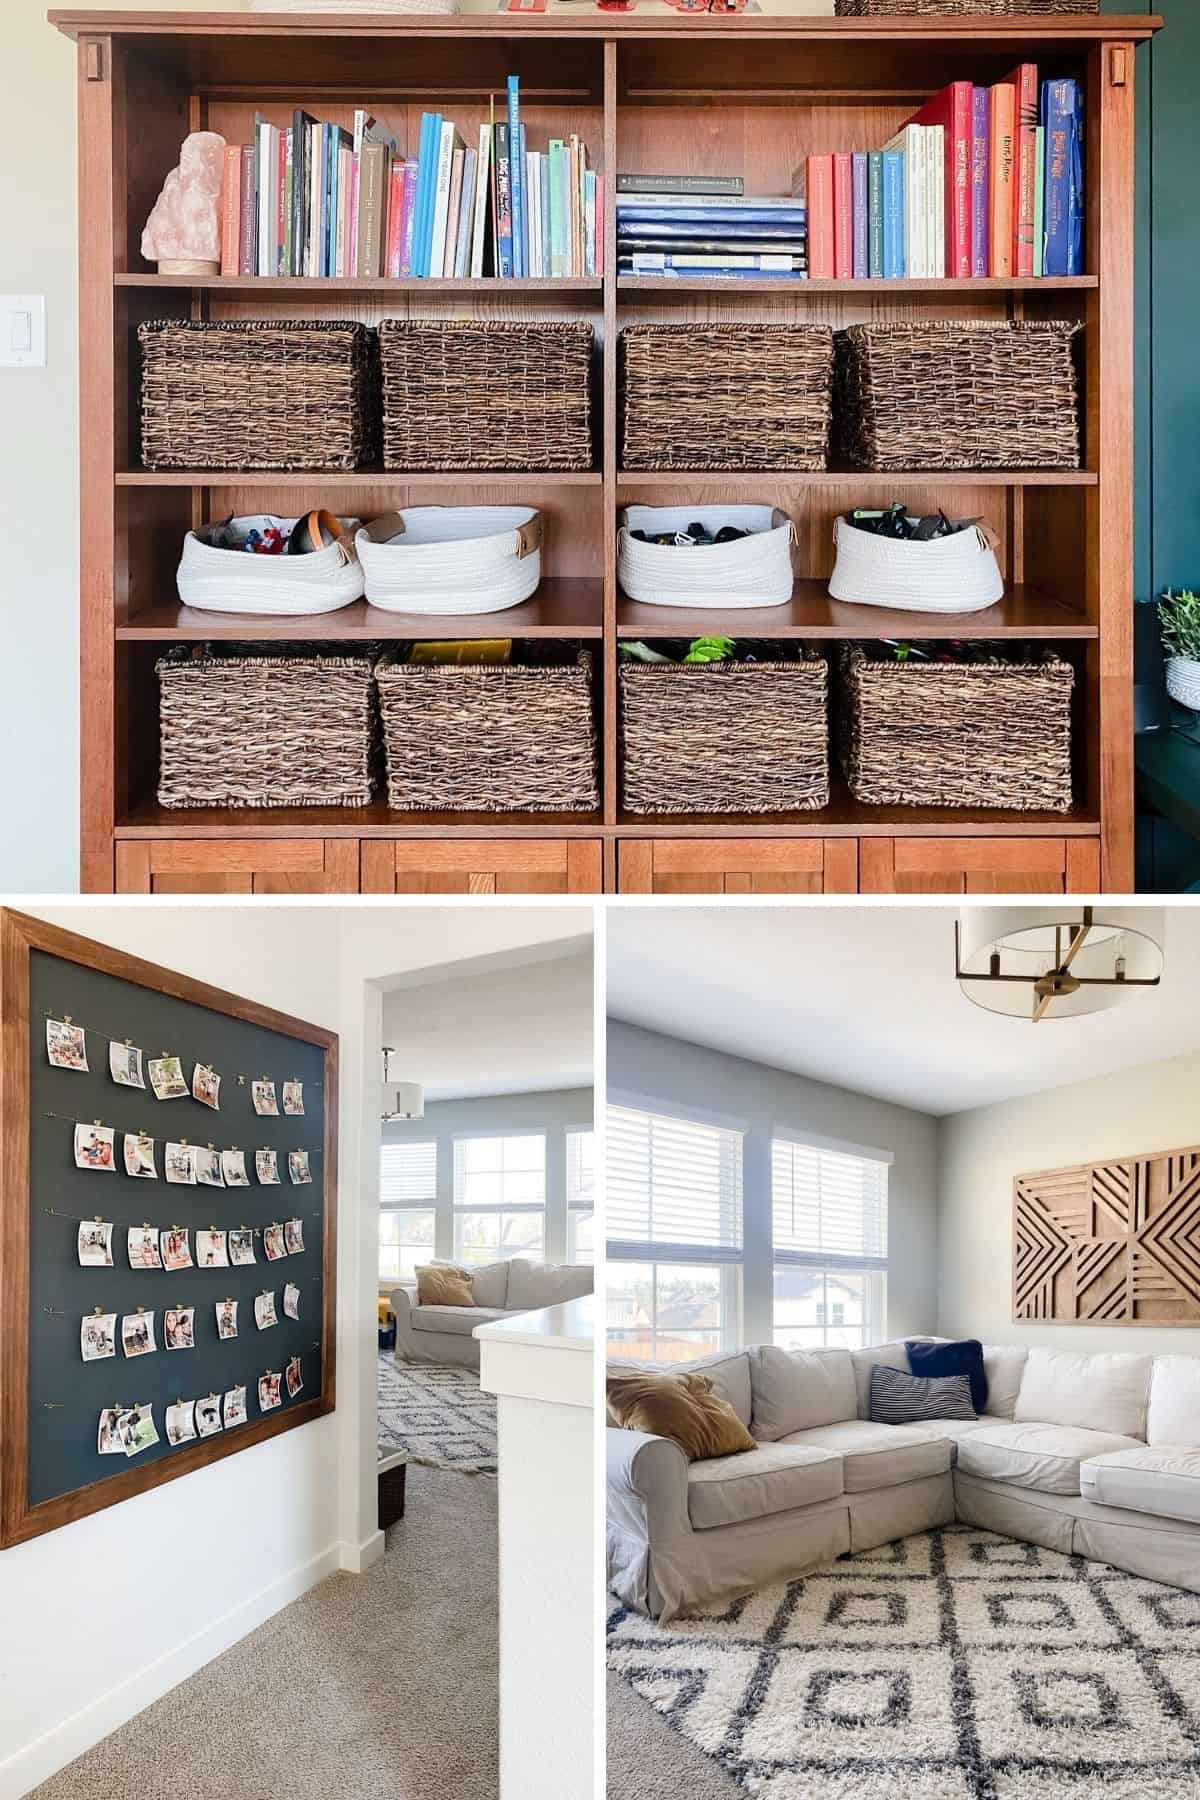 Collage of images from a cozy family room